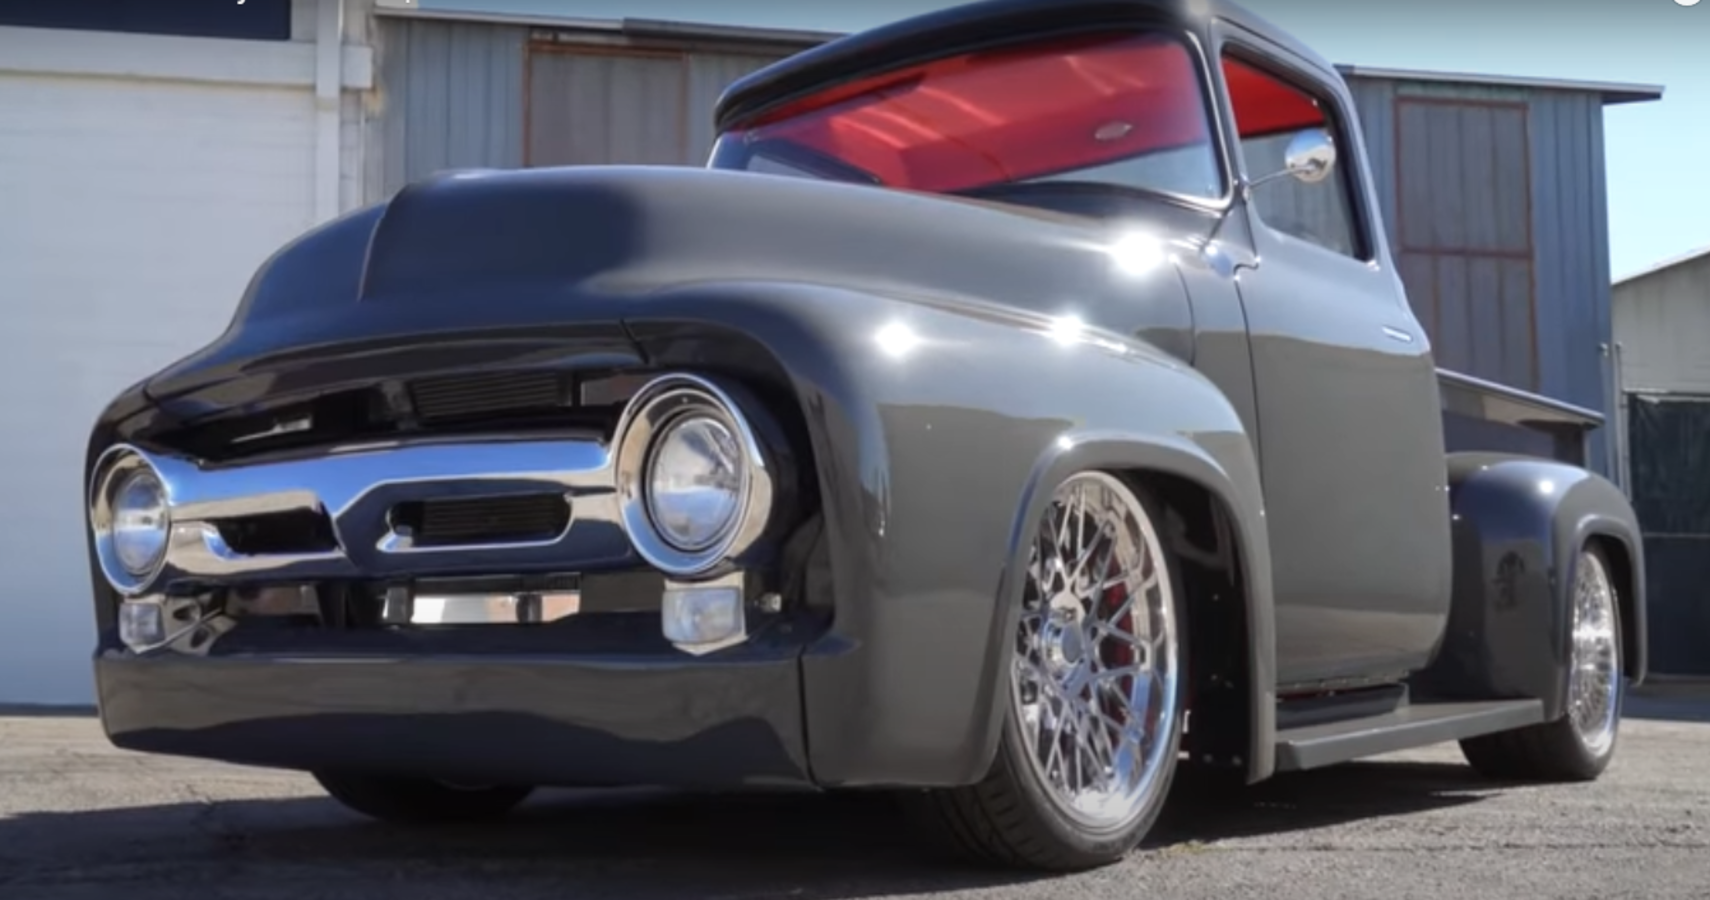 Check Out This Beautiful Coyote Powered Ford F100 Restomod